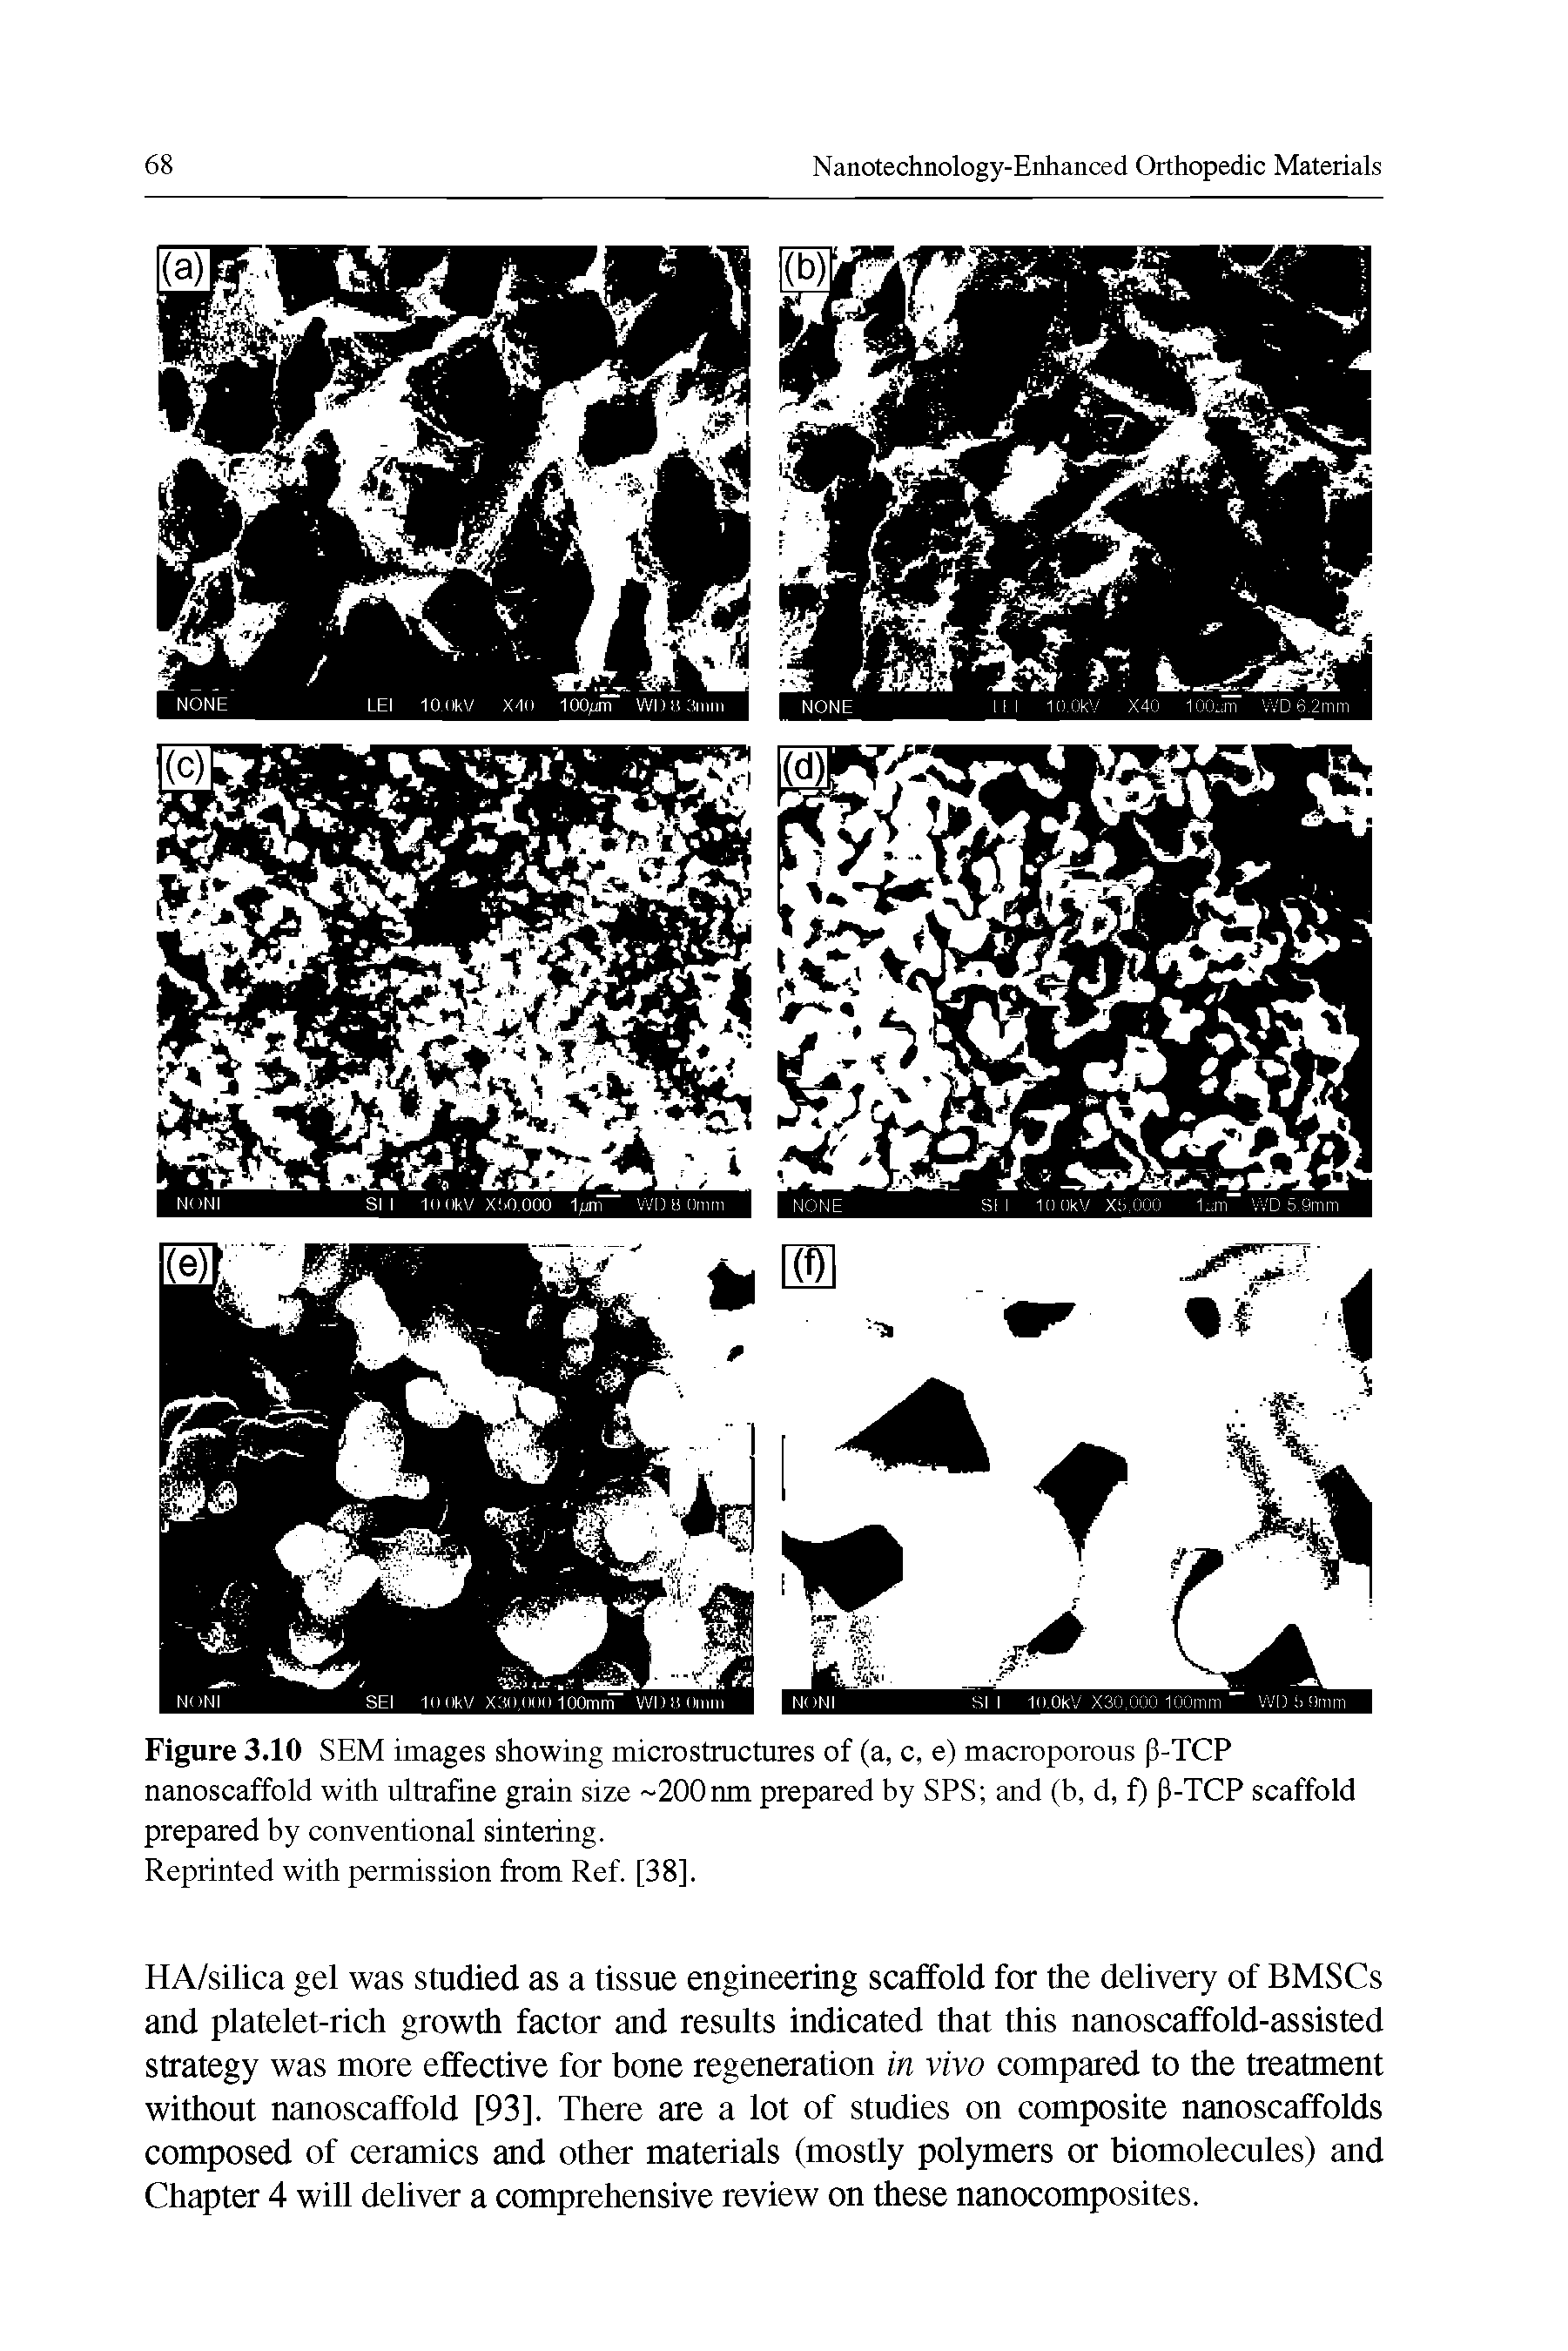 Figure 3.10 SEM images showing microstructures of (a, c, e) macroporous p-TCP nanoscaffold with ultrafine grain size 200nm prepared by SPS and (b, d, f) P-TCP scaffold prepared by conventional sintering.